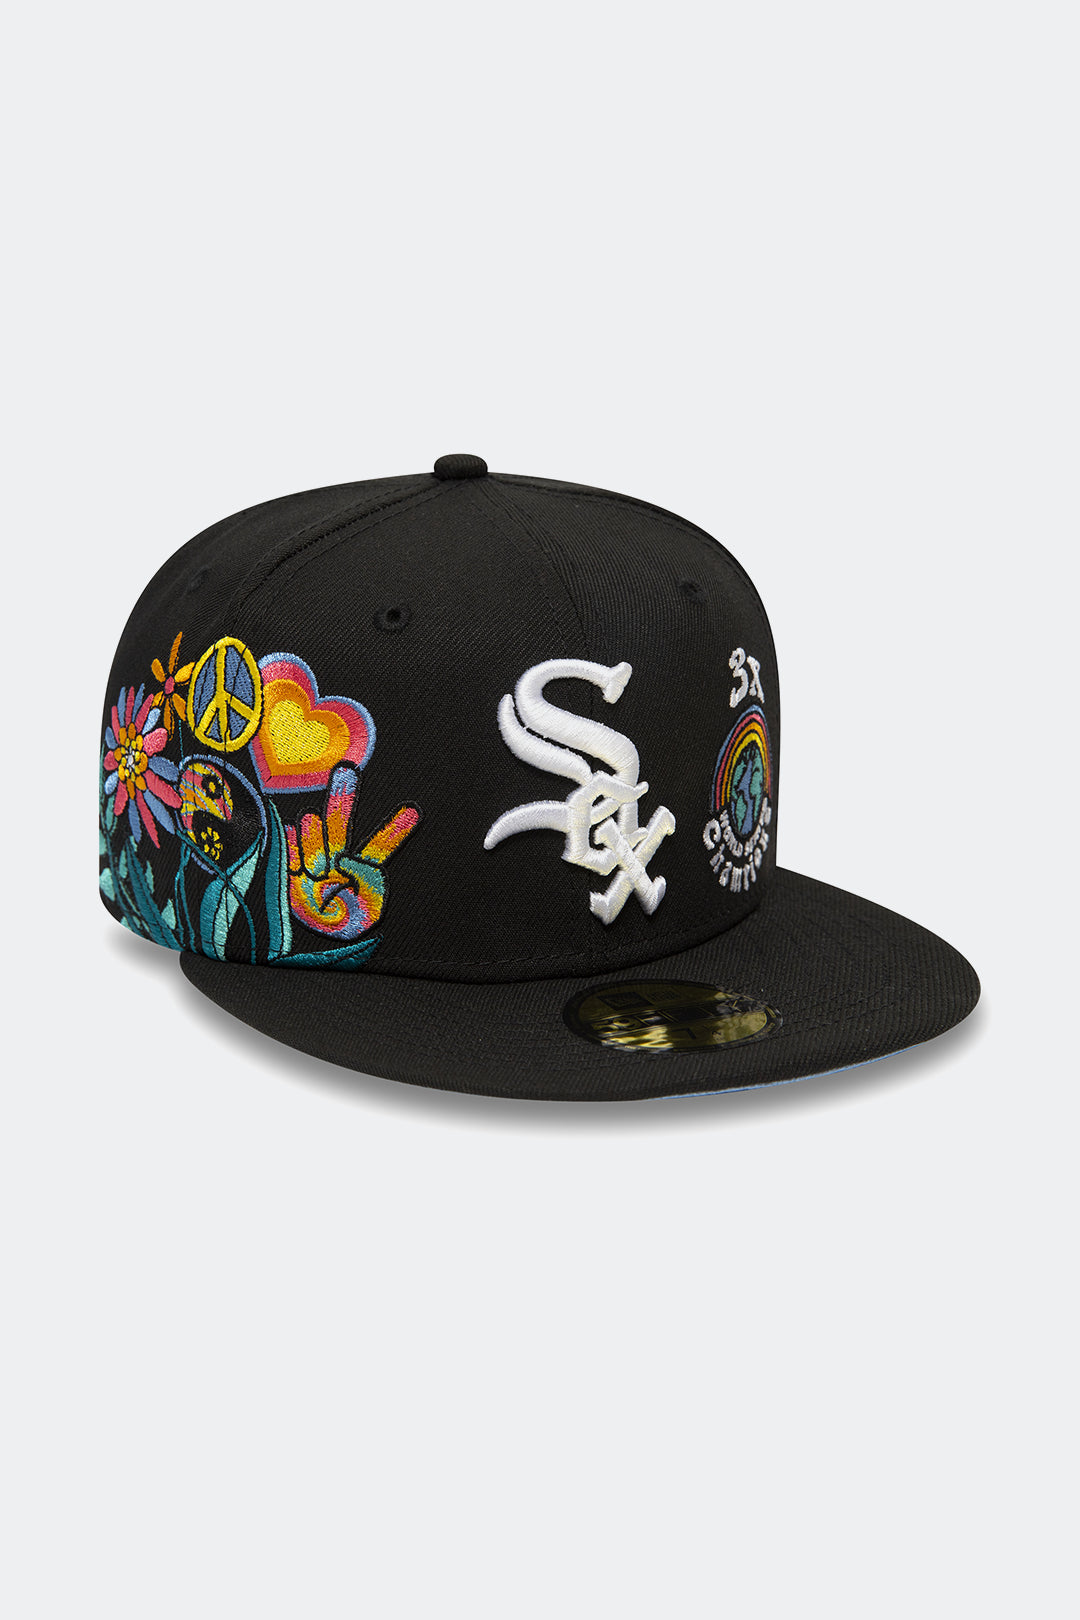 NEW ERA 59FIFTY CHICAGO WHITE SOX "GROOVY" - HYPE